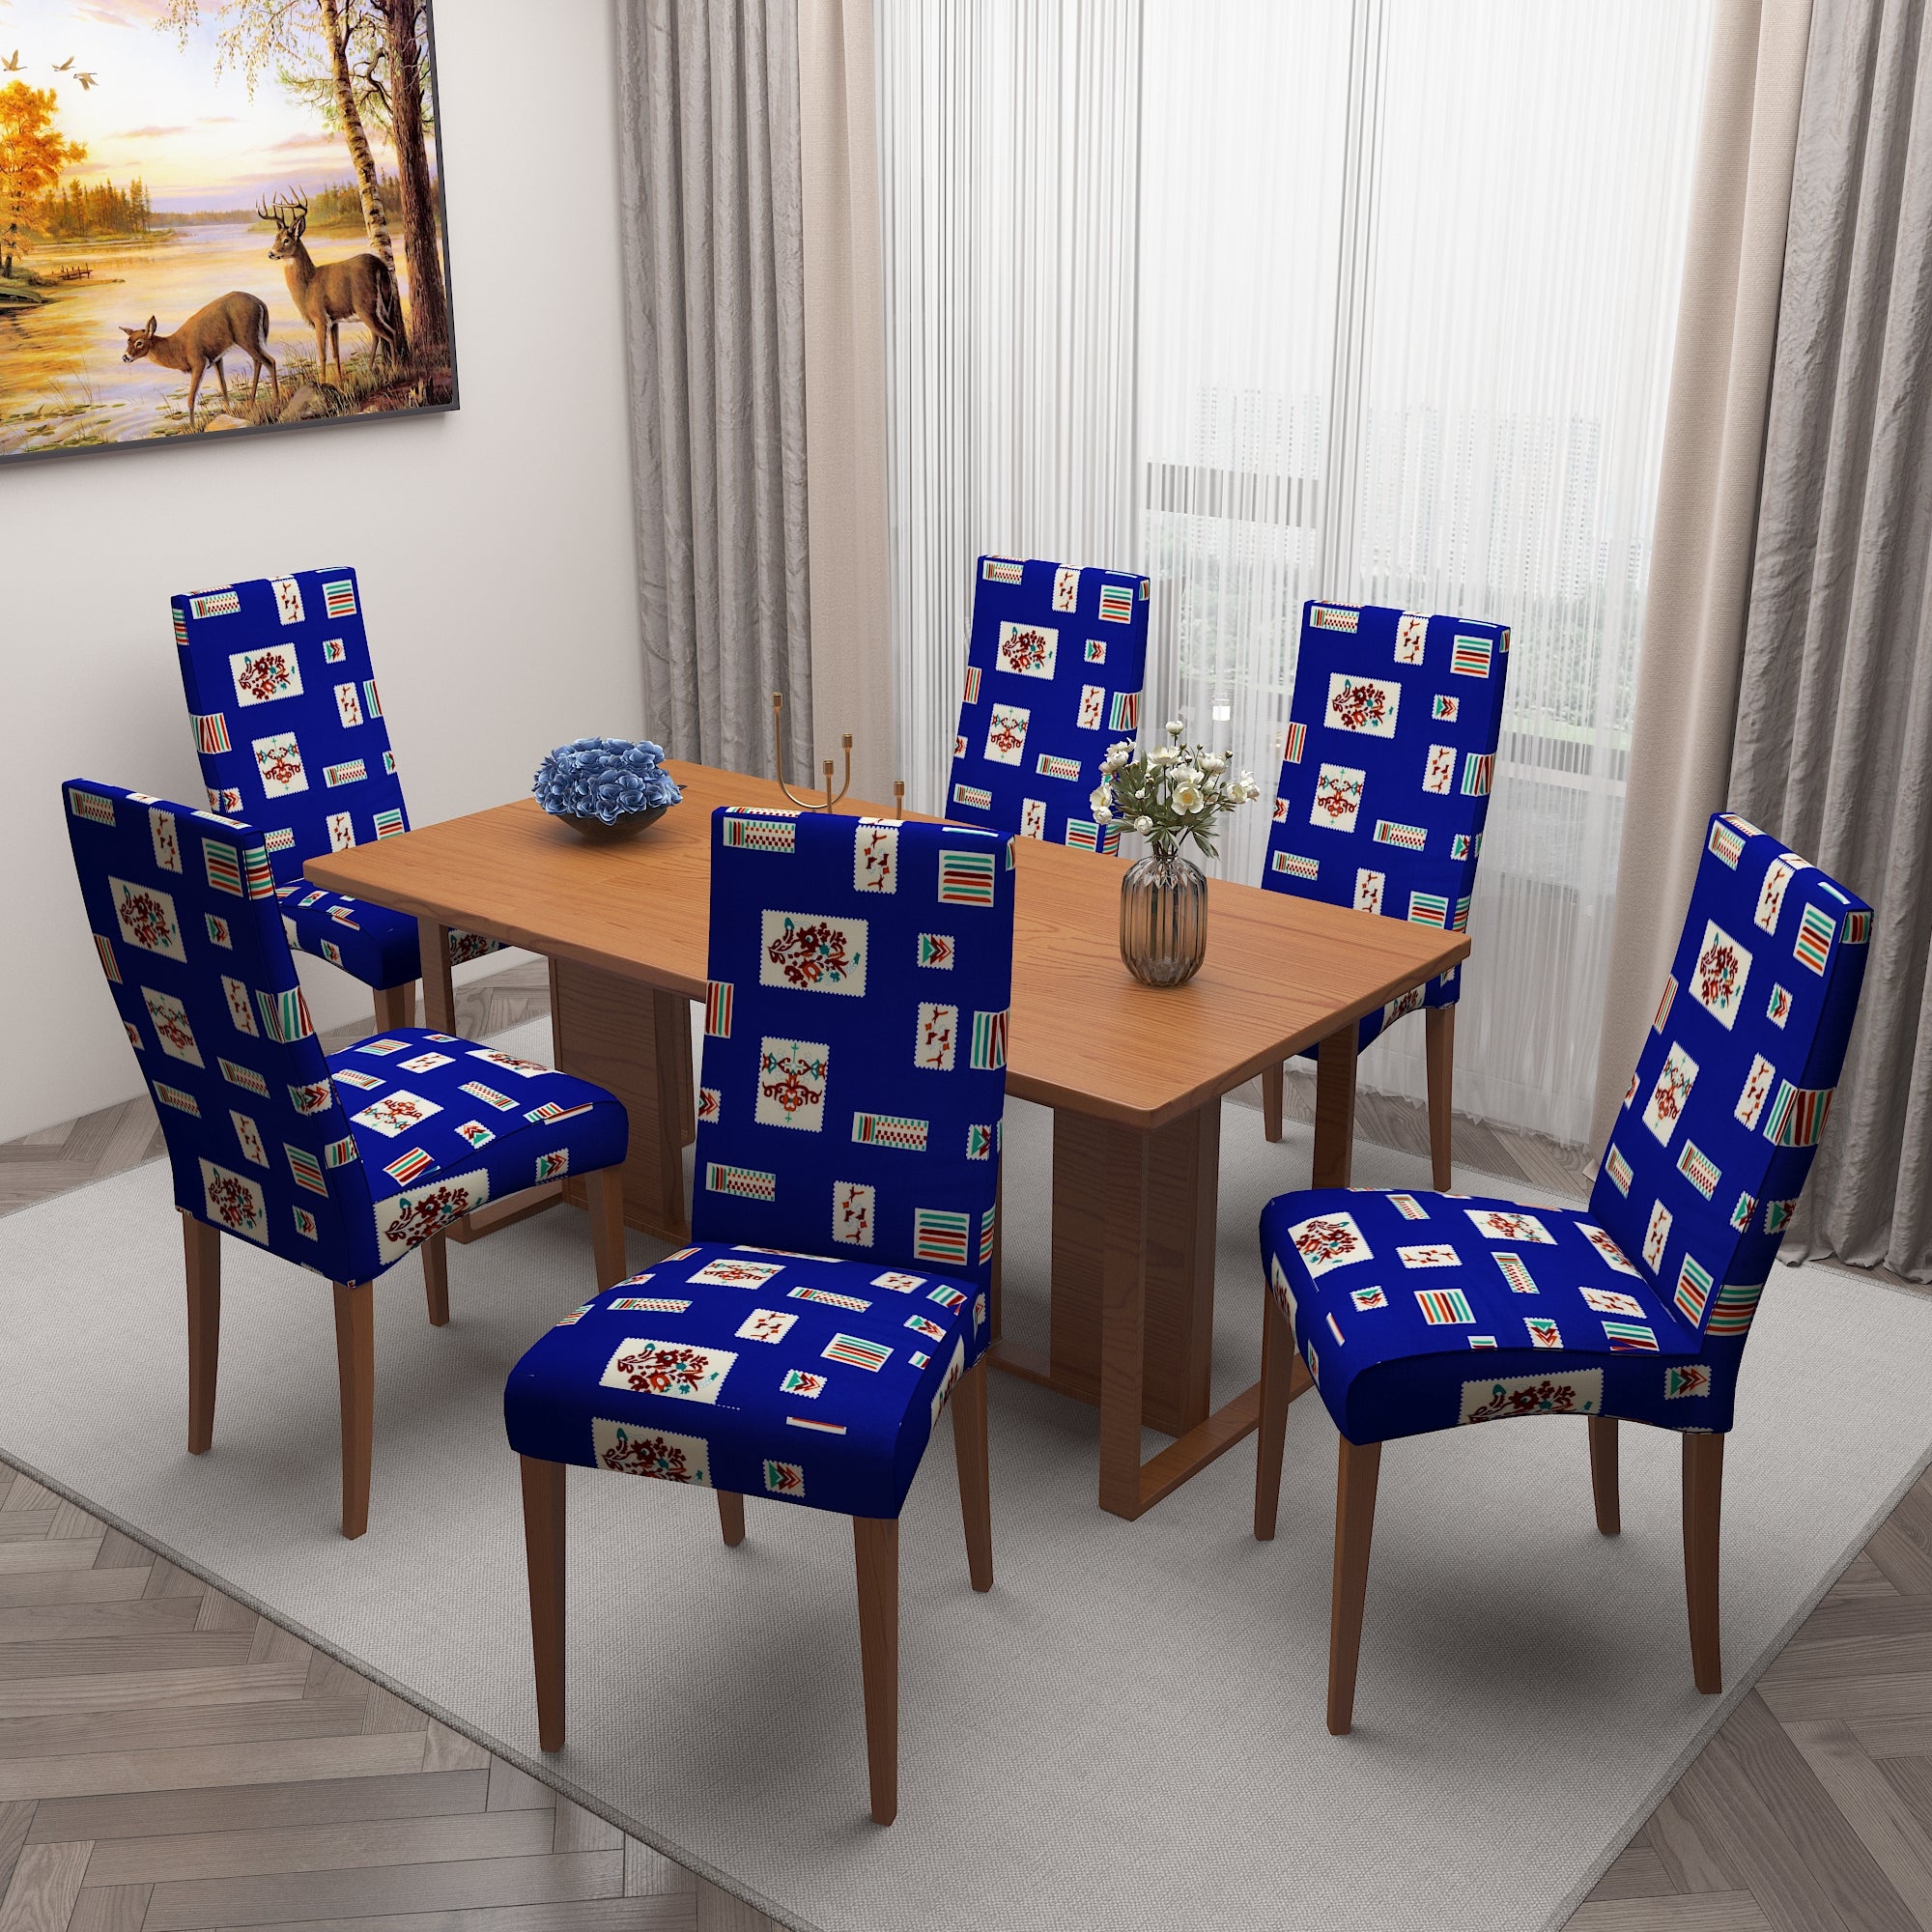 Polyester Spandex Stretchable Printed Chair Cover, MG28